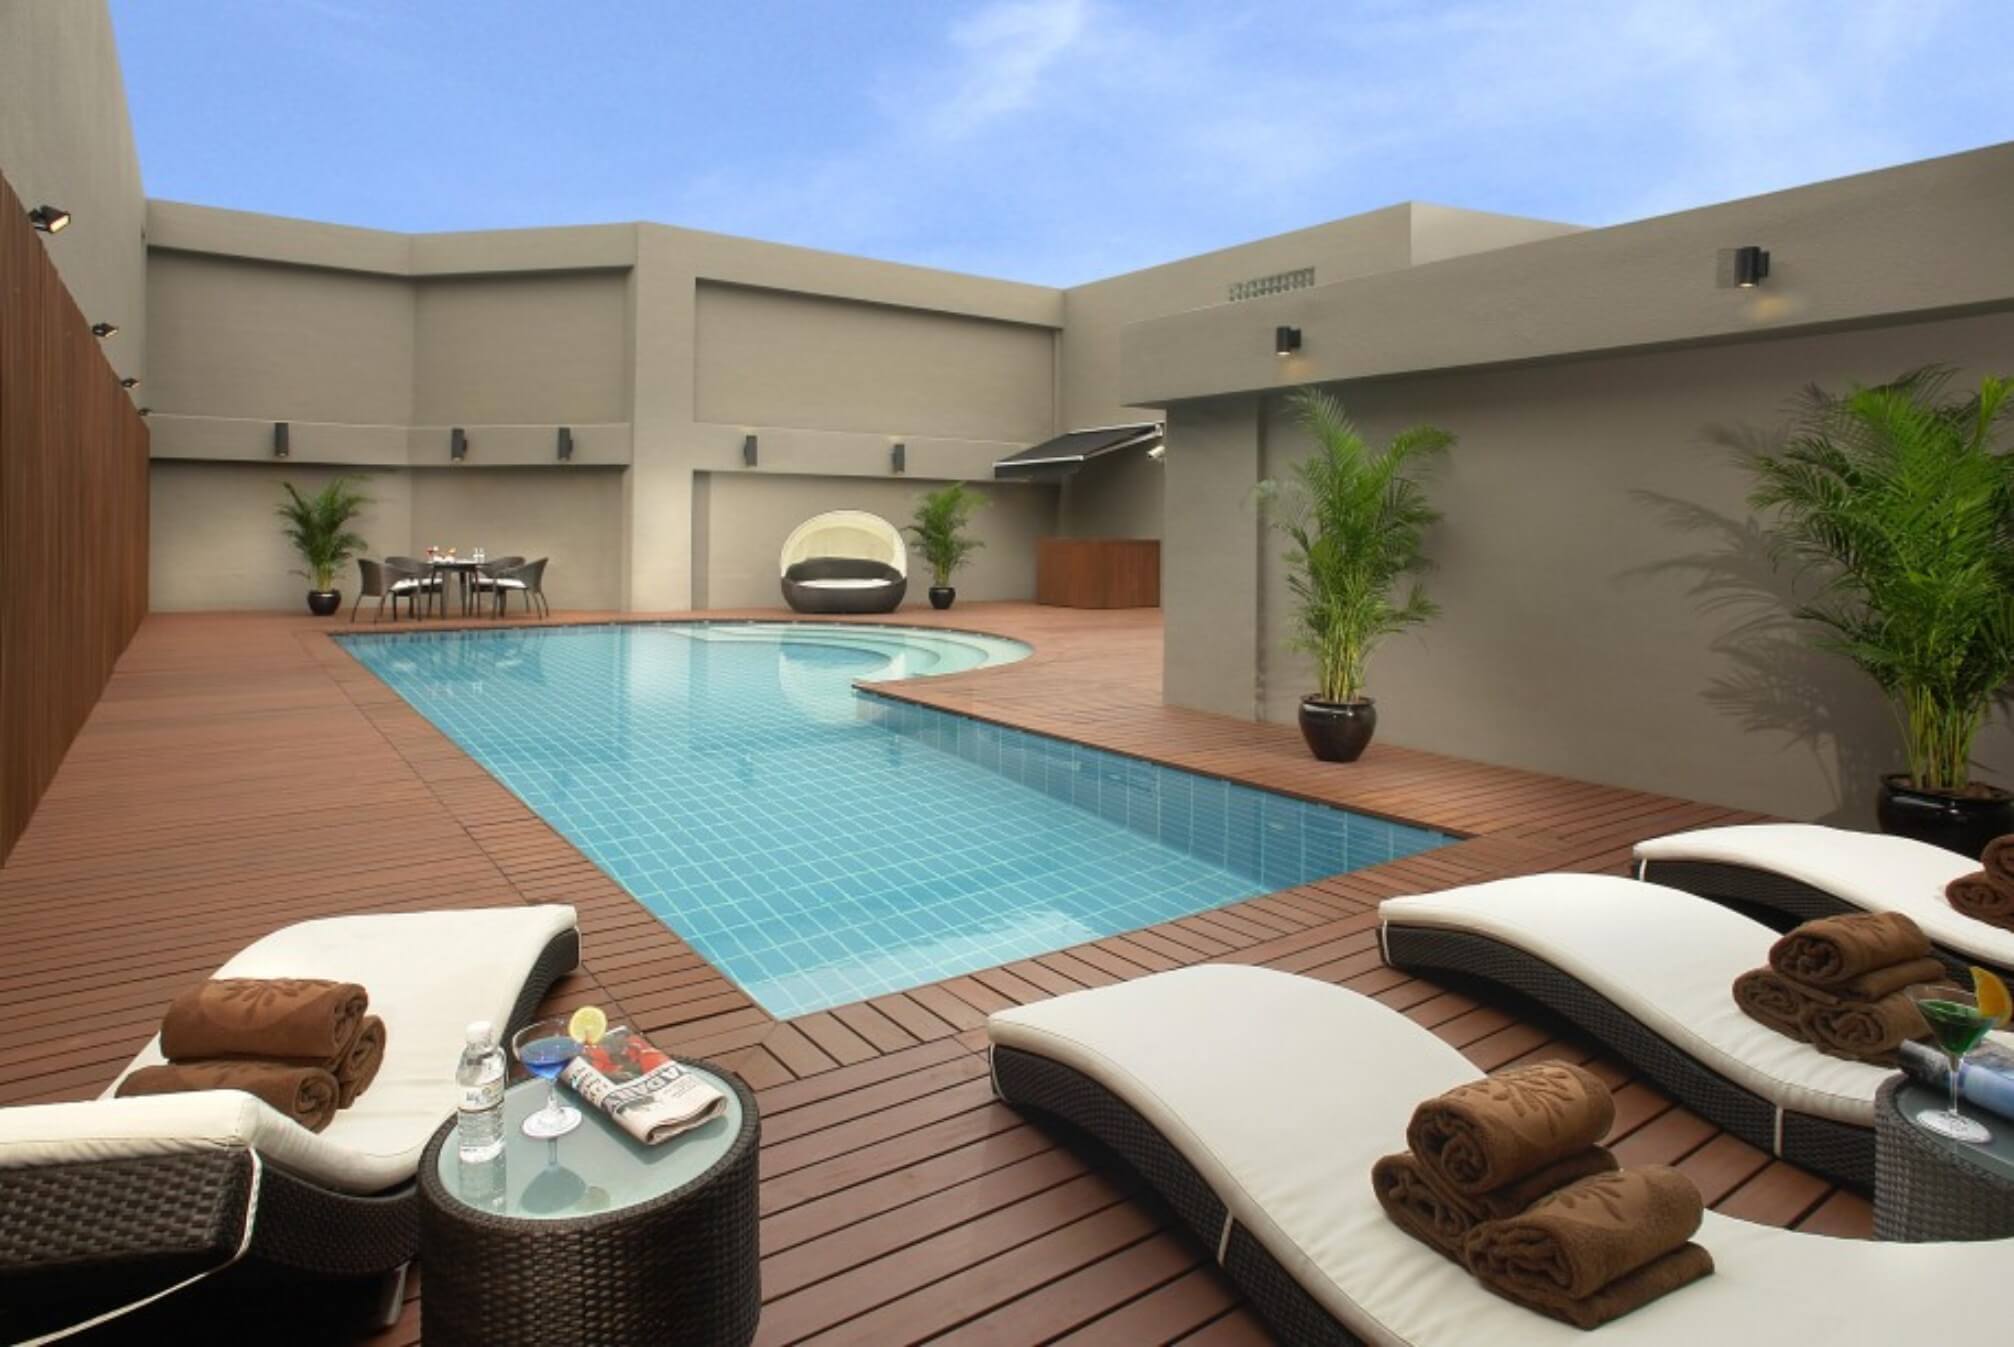 A swimming pool with lounge chairs and towels
